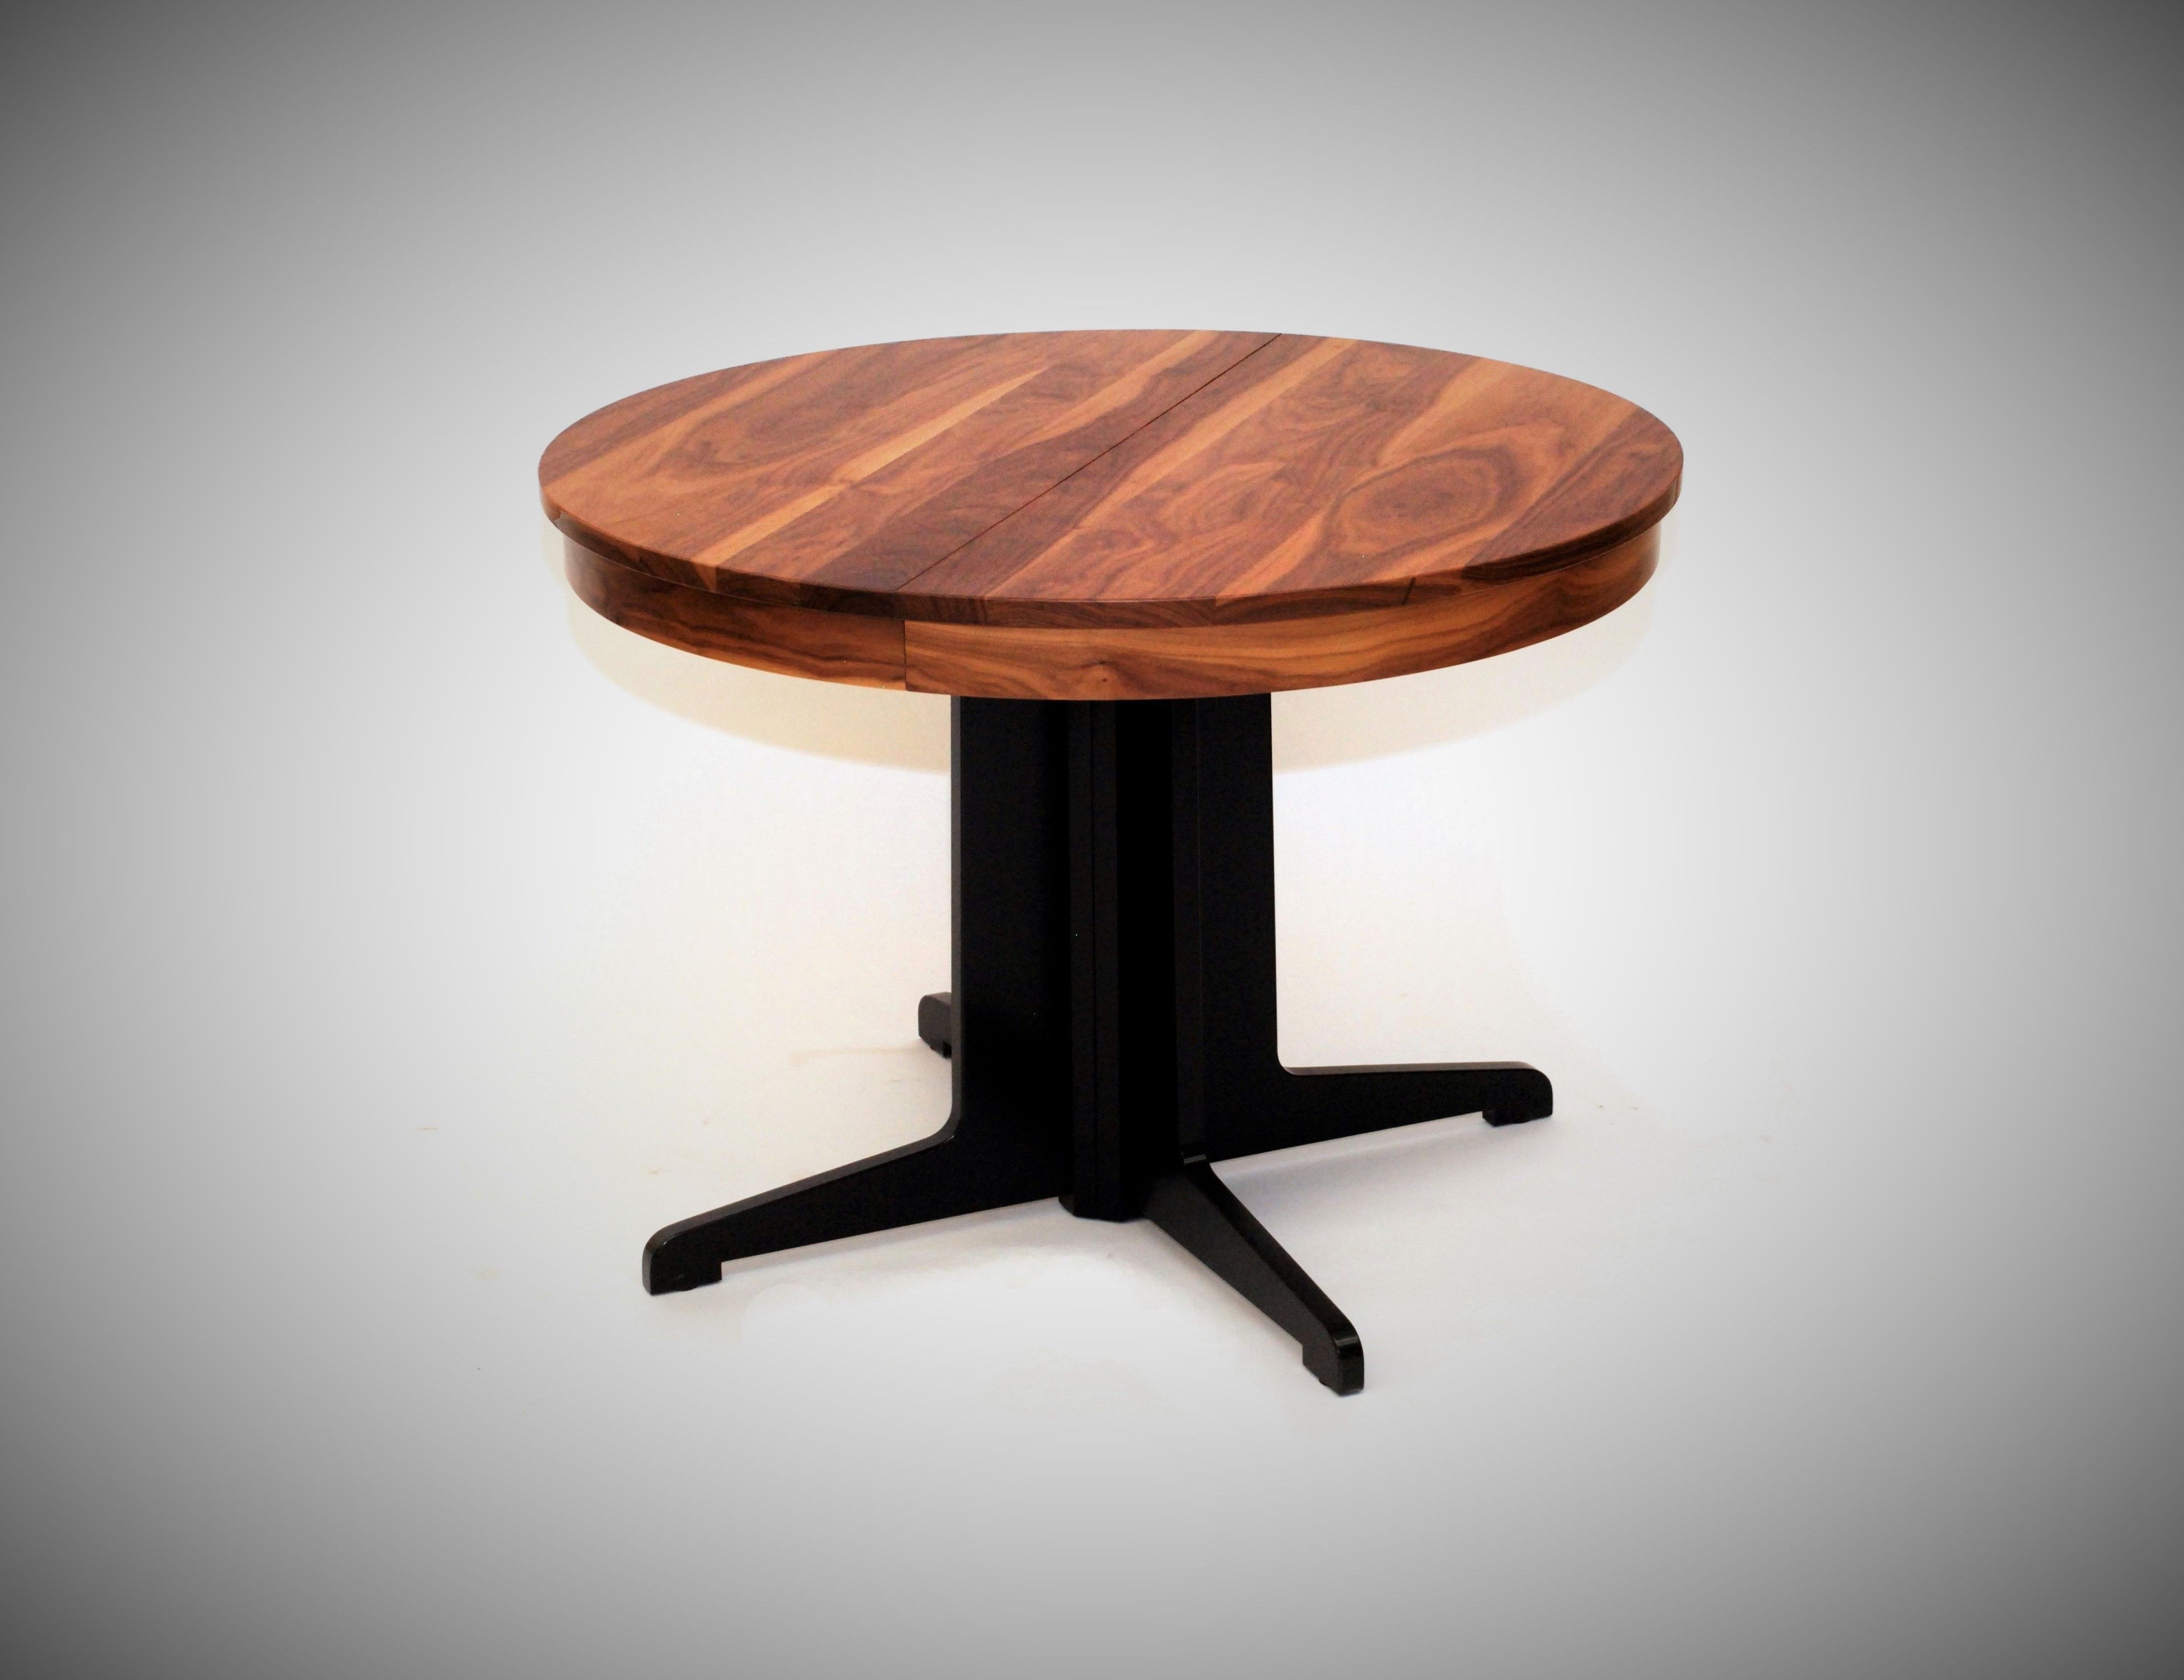 Round Extendable Dining Tables Regarding Most Up To Date Handmade Lotus Round Extendable Dining Tablebelak Woodworking (View 13 of 25)